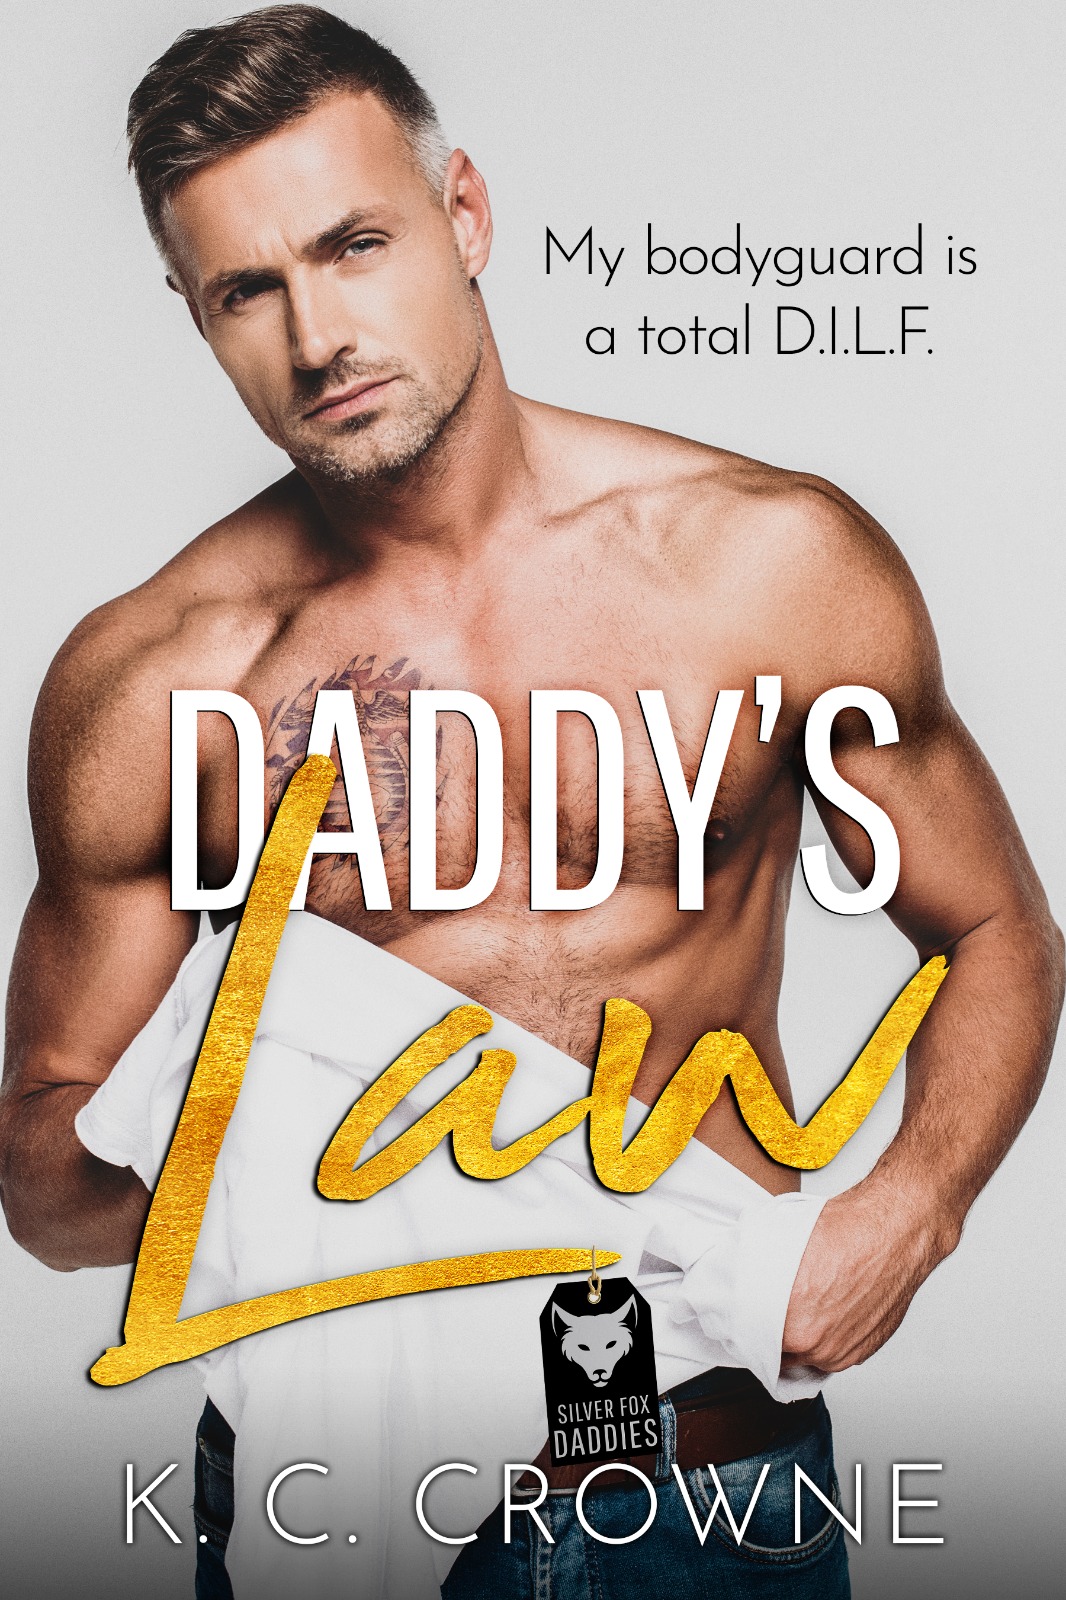 alona stern recommends silverfox daddies pic